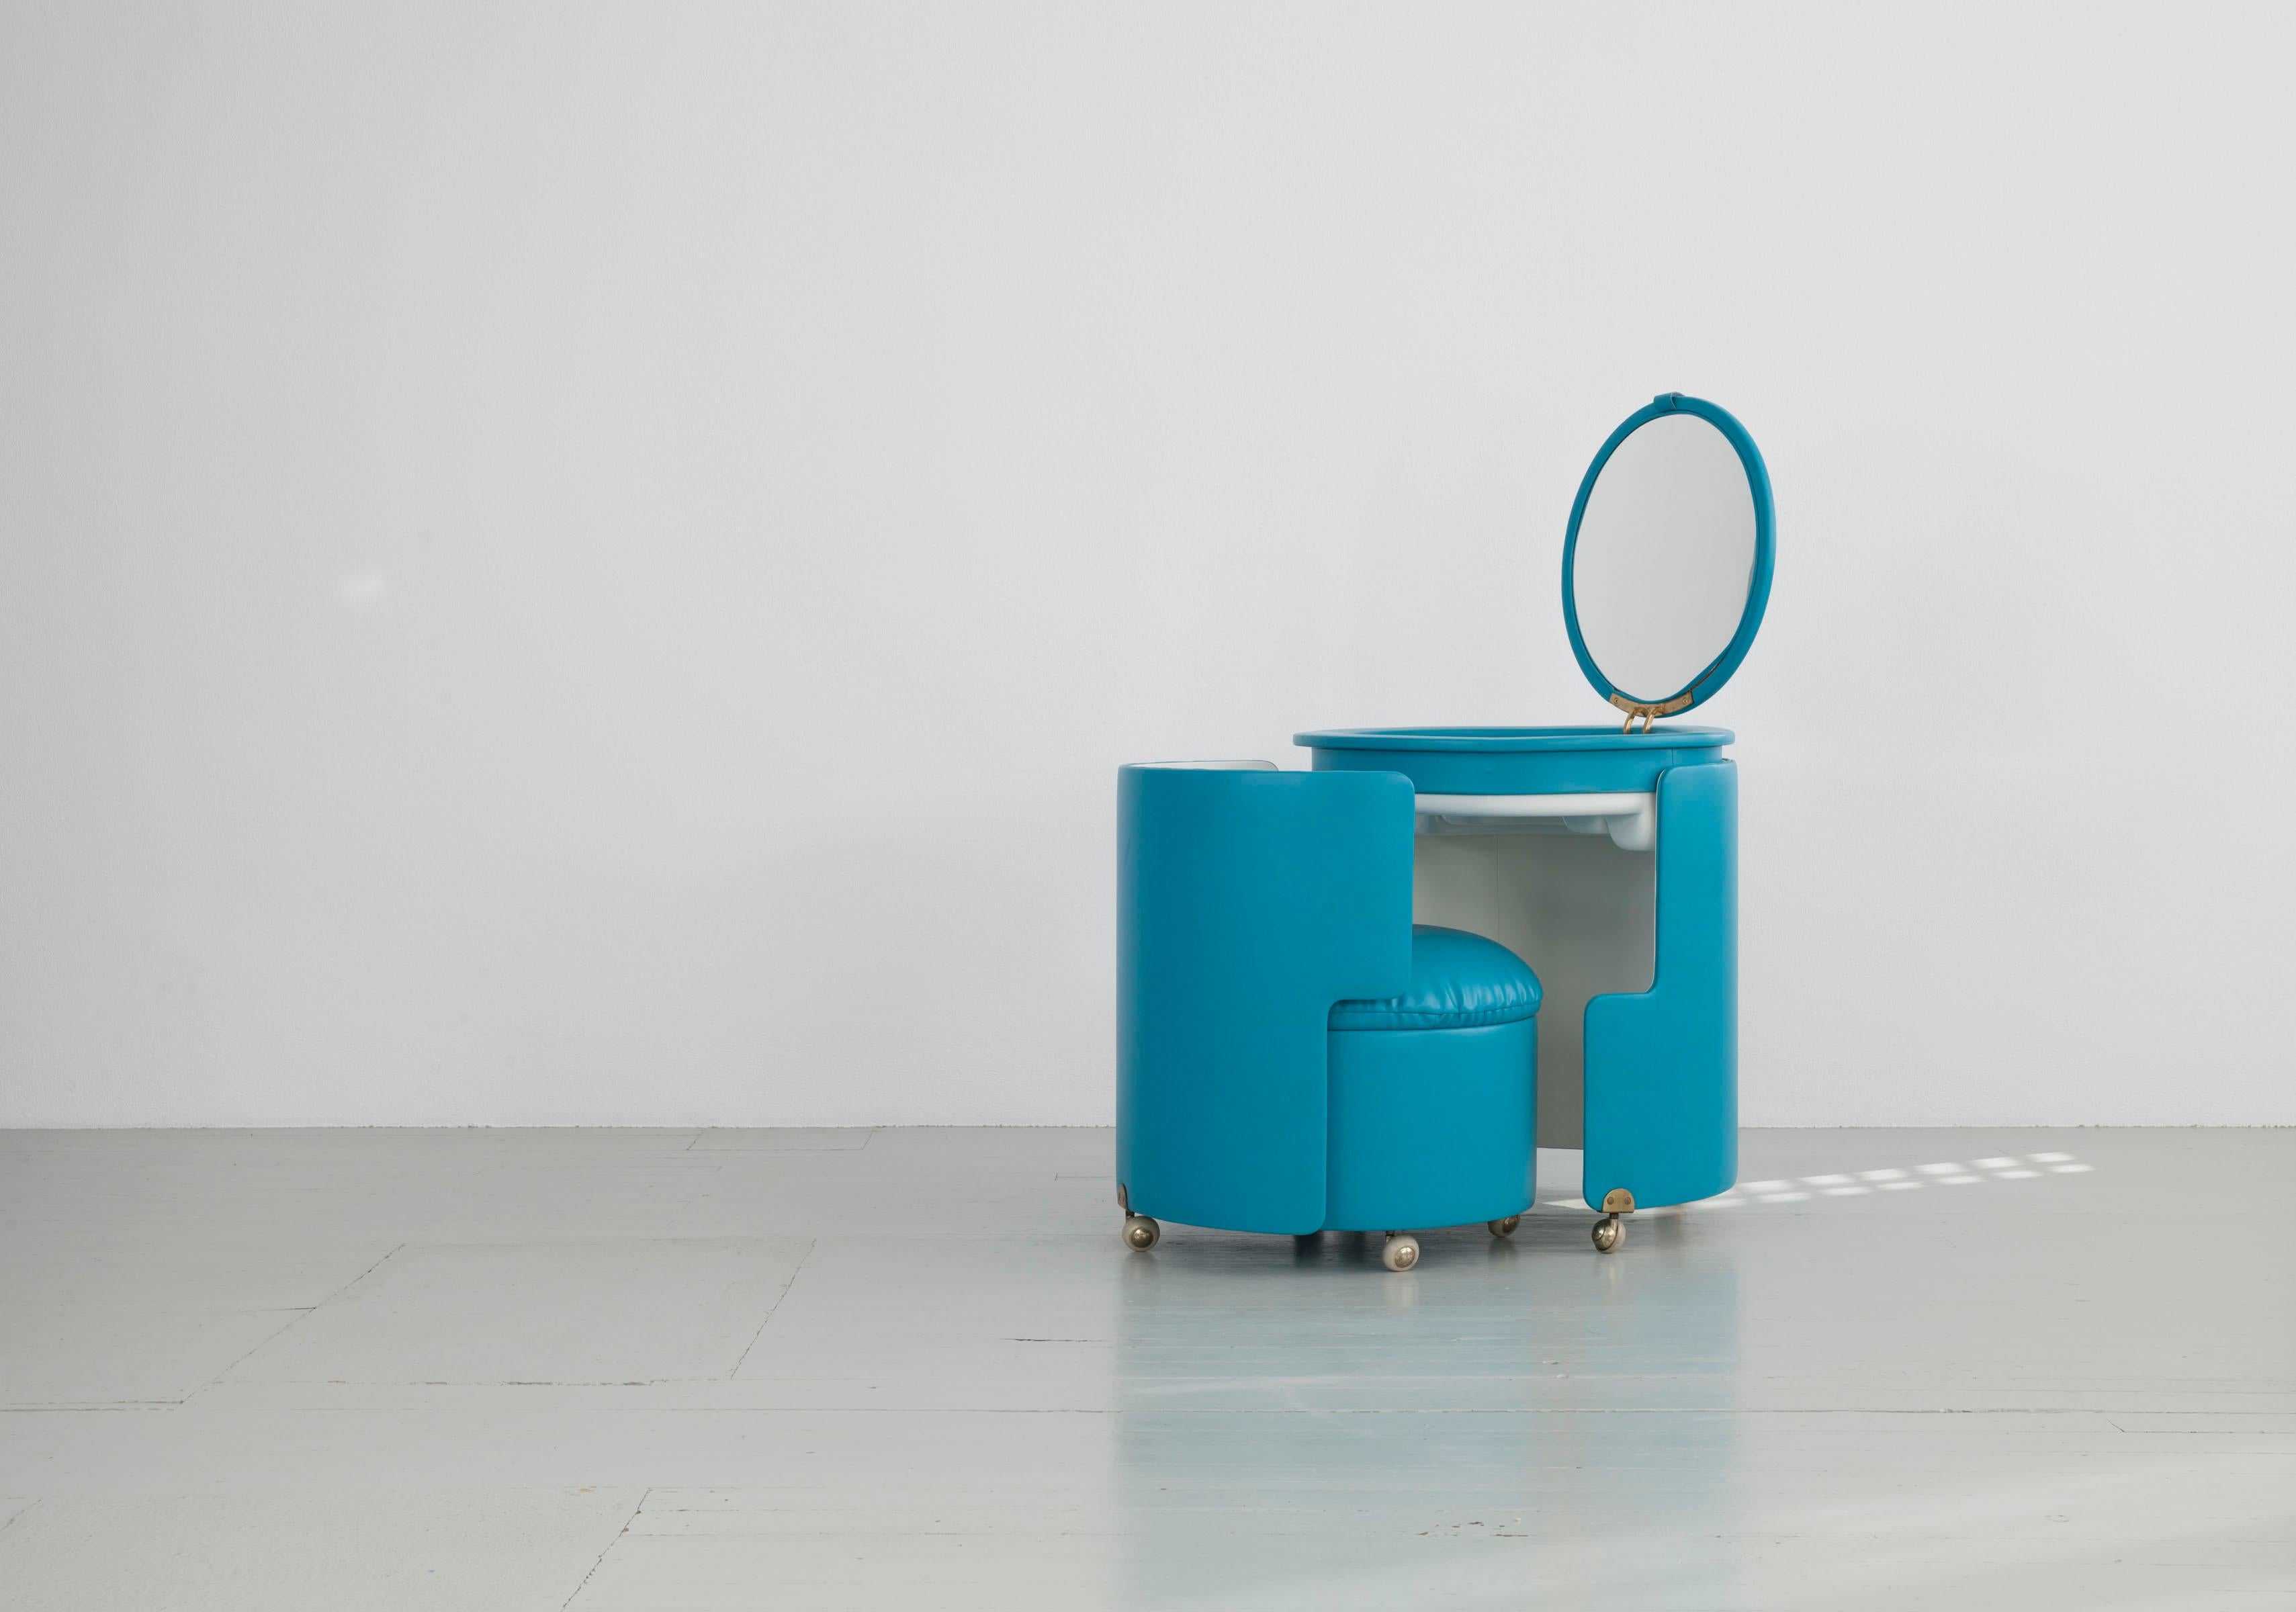 Make-up table with very rare sidetable, designed by the Italian designer Luigi Massoni in 1968. It was made by the Italian company Poltrona Frau. The barrel-shaped body with the integrated armchair is rollable and equipped with a mirror